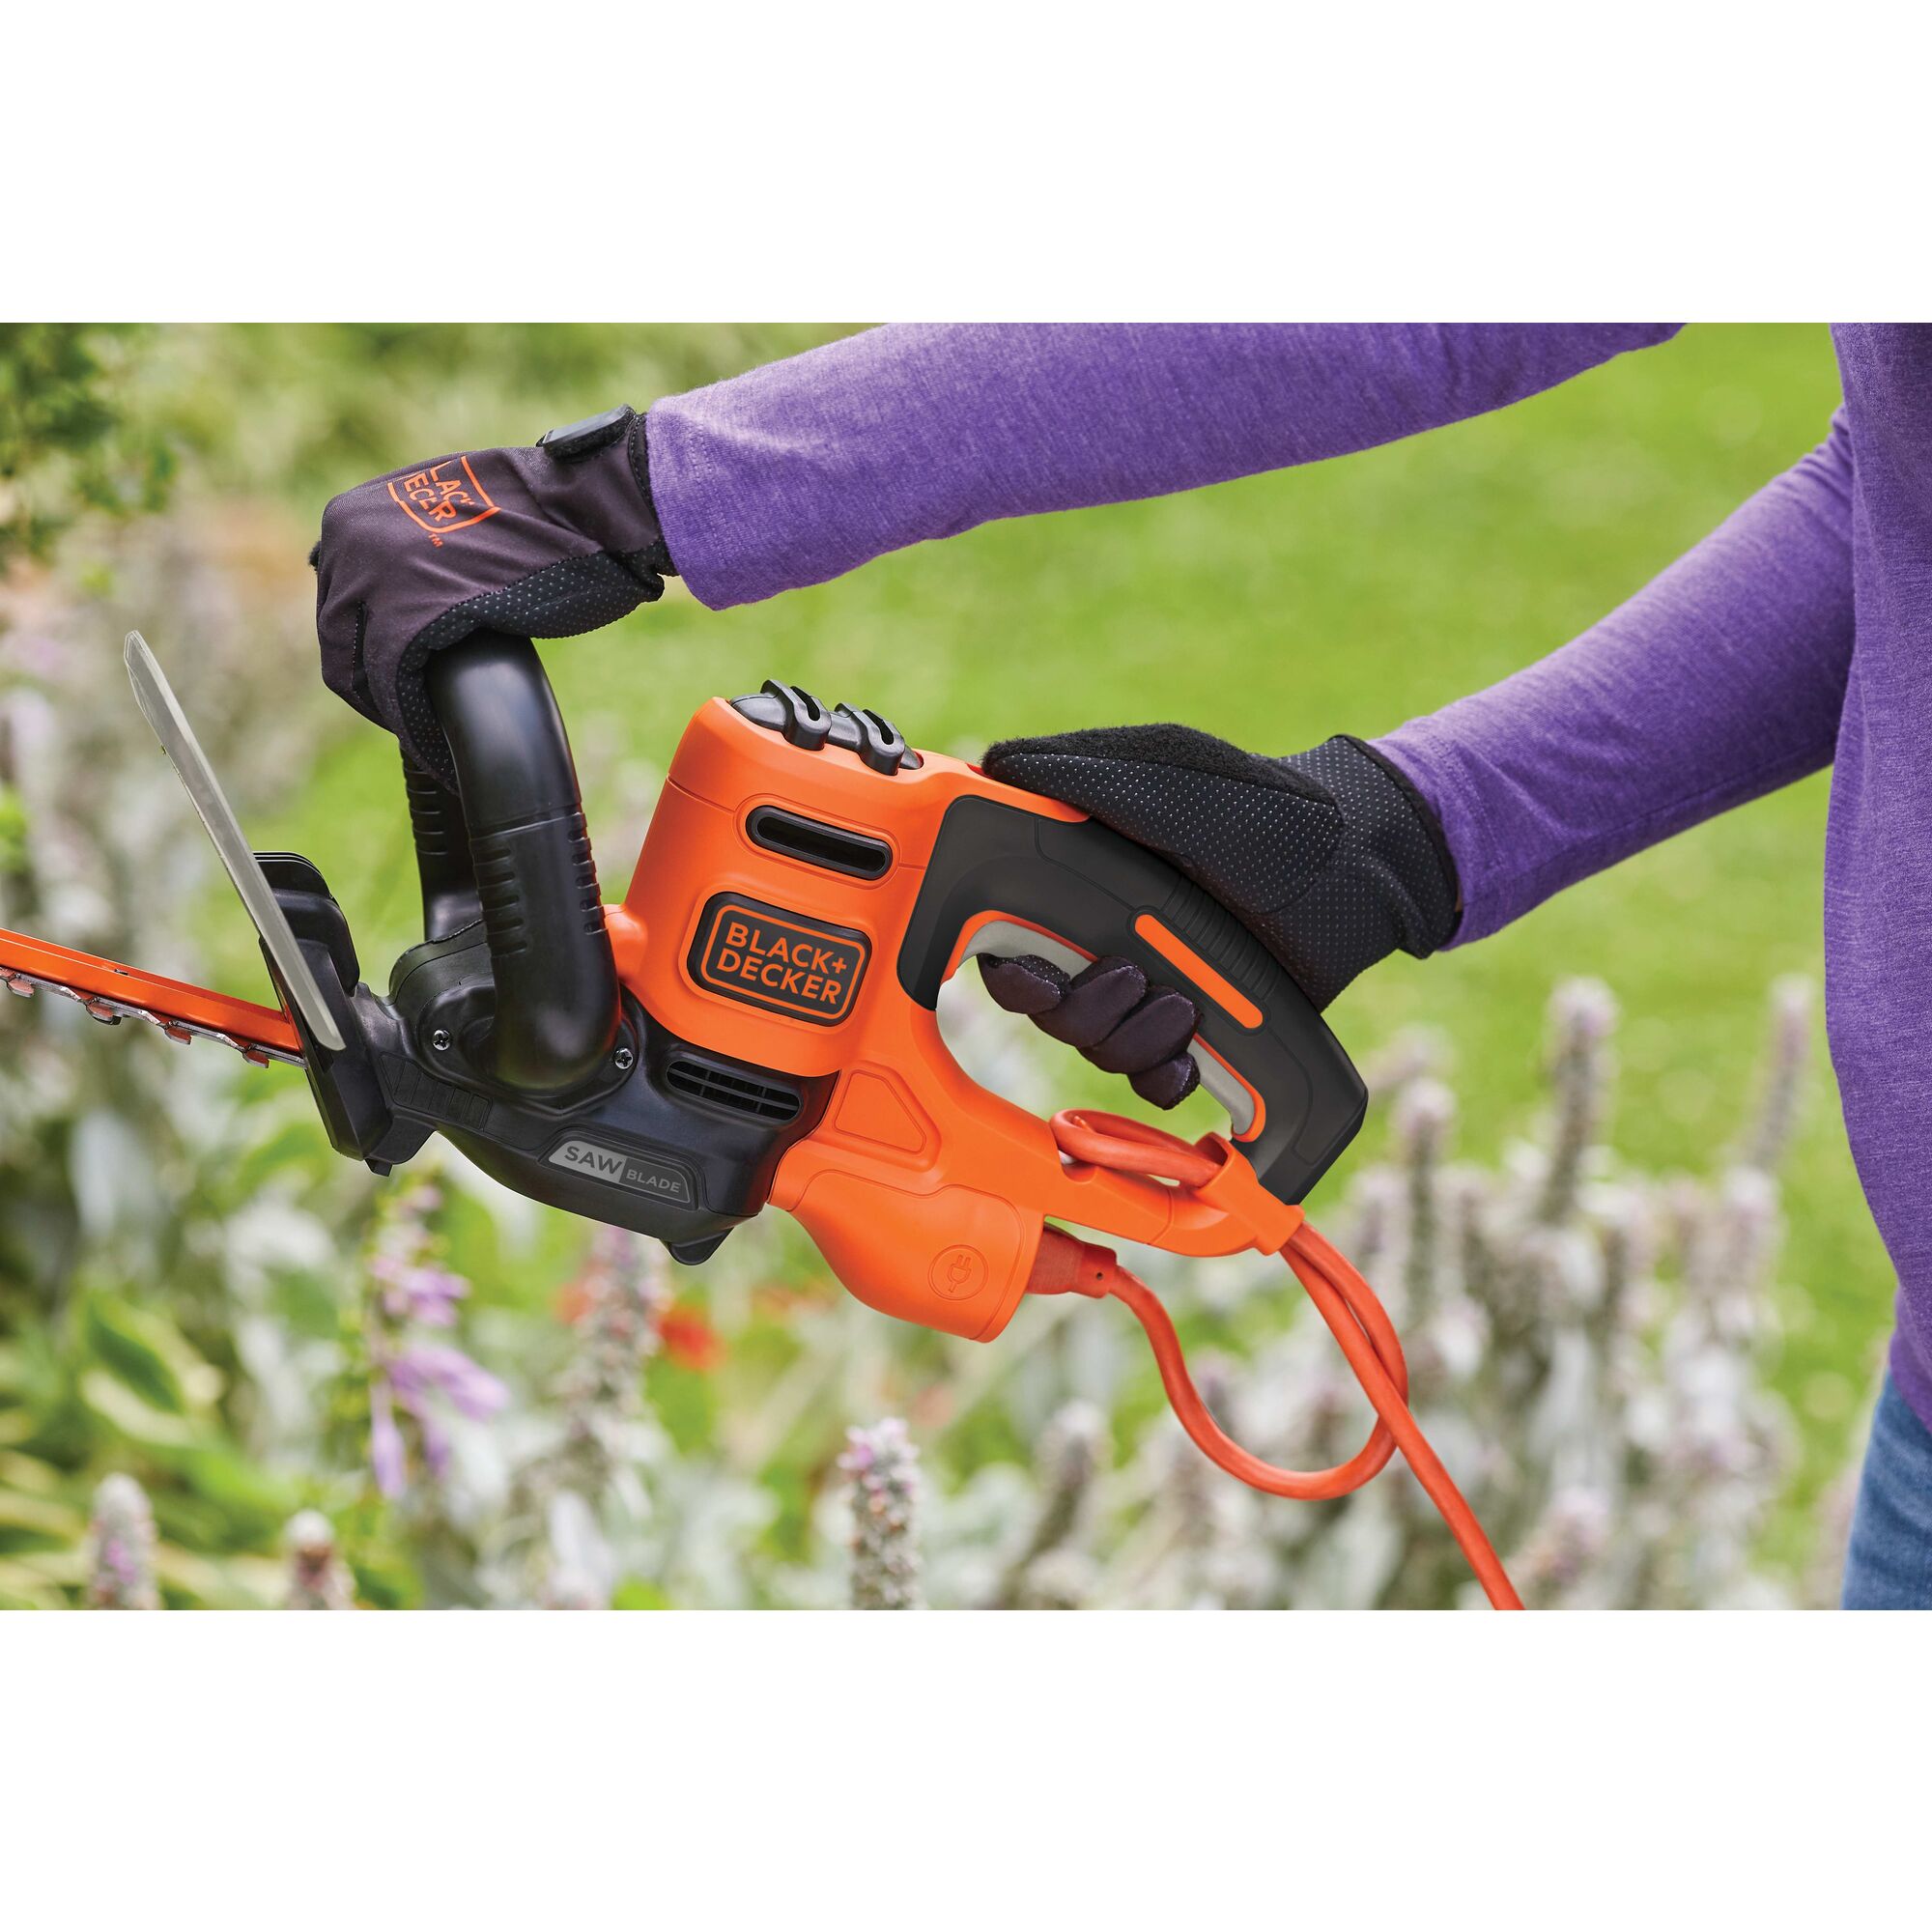 Full wrap around front handle feature of 20 inch SAW BLADE electric hedge trimmer.